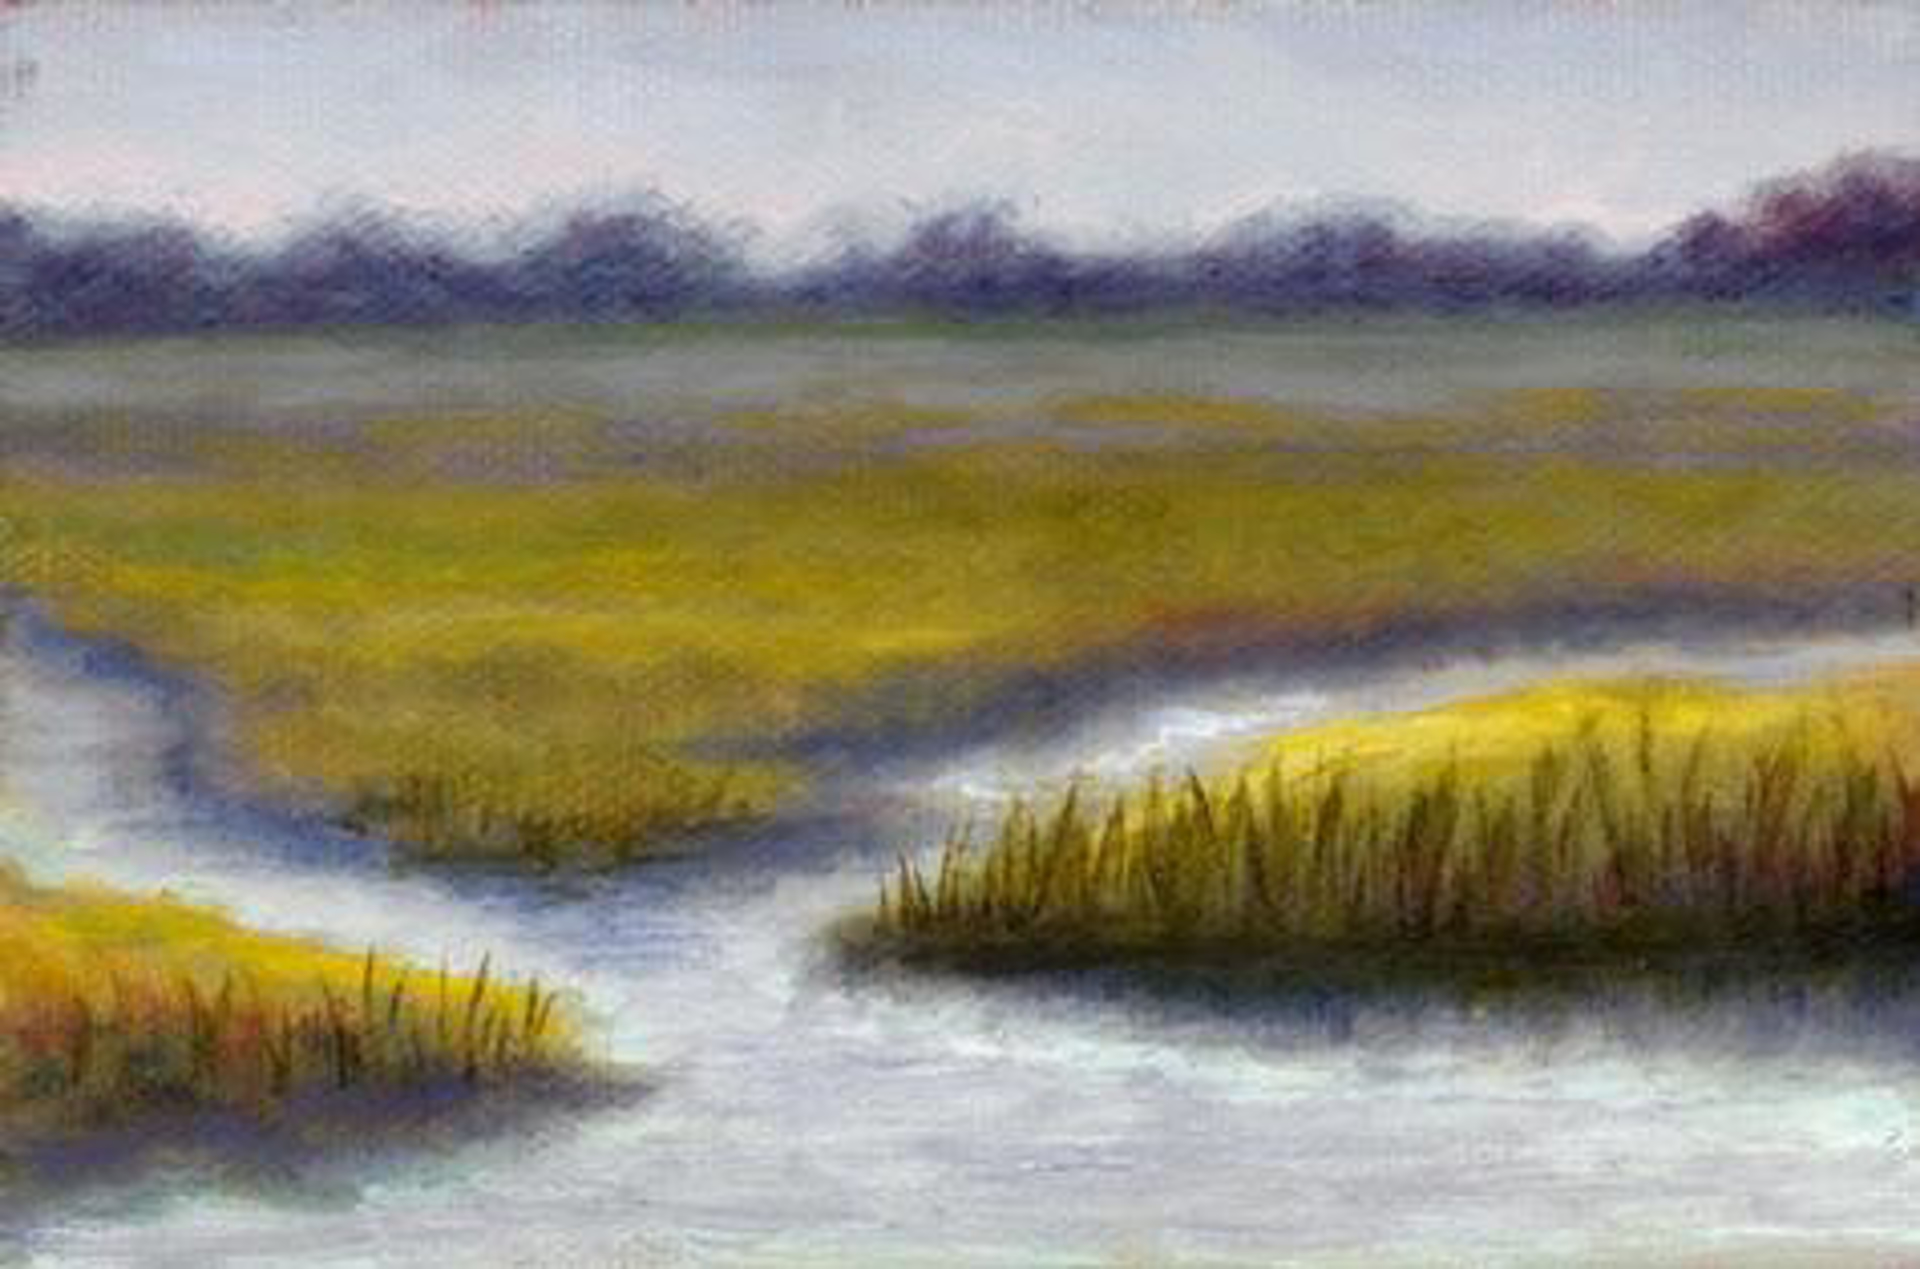 Low Country Triptych 3 by Brenda Orcutt, Giclee--Prints